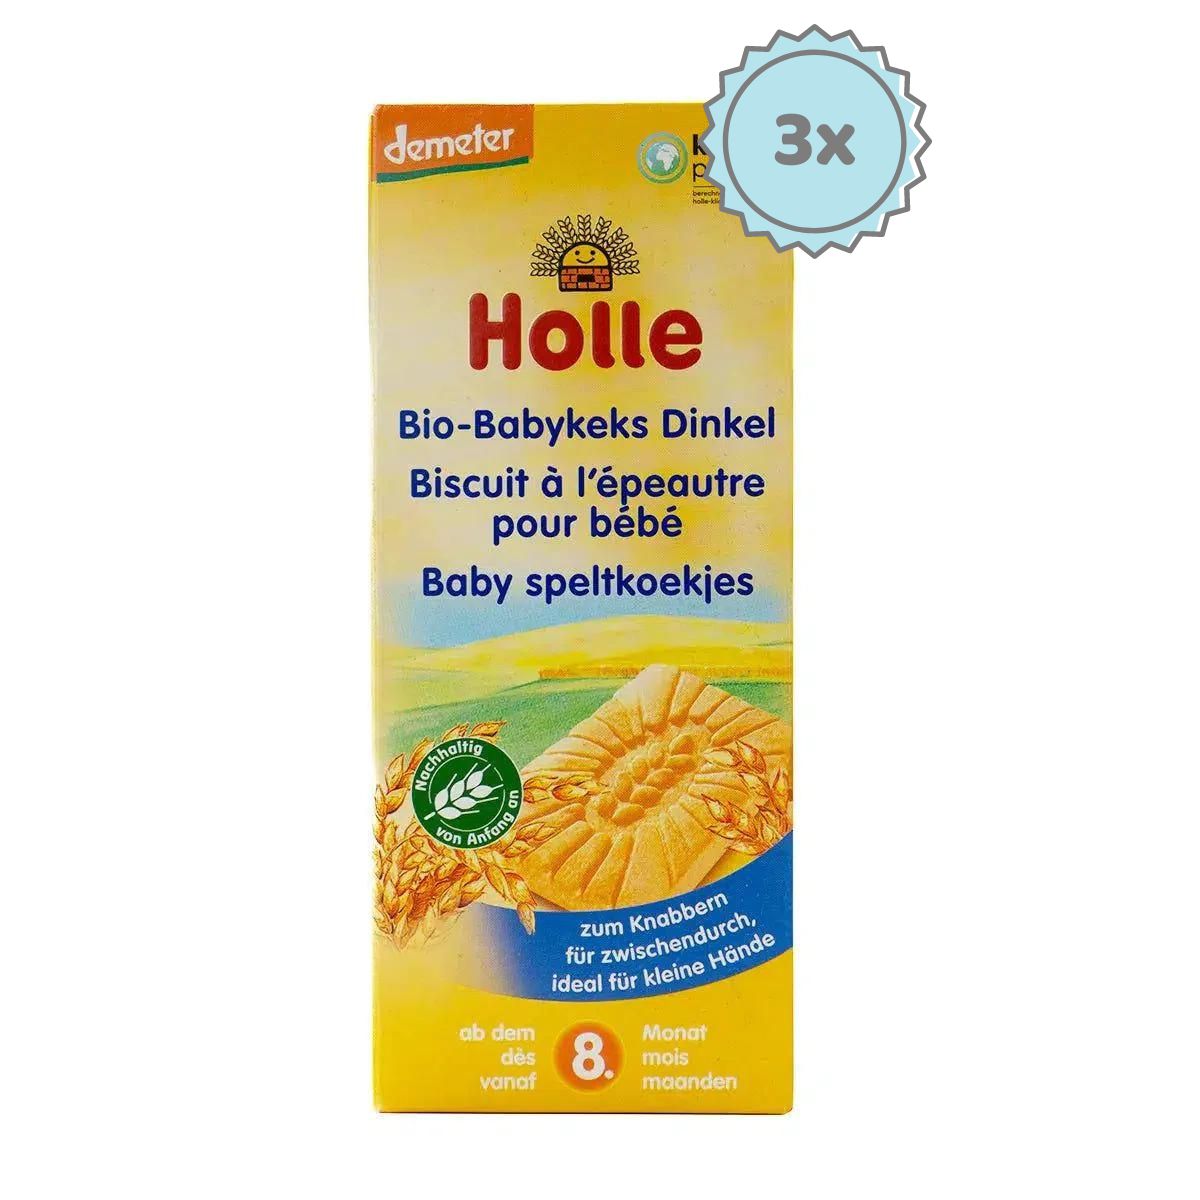 Holle Snack - Spelt Biscuits (8+ Months), 150g - 3 Packs